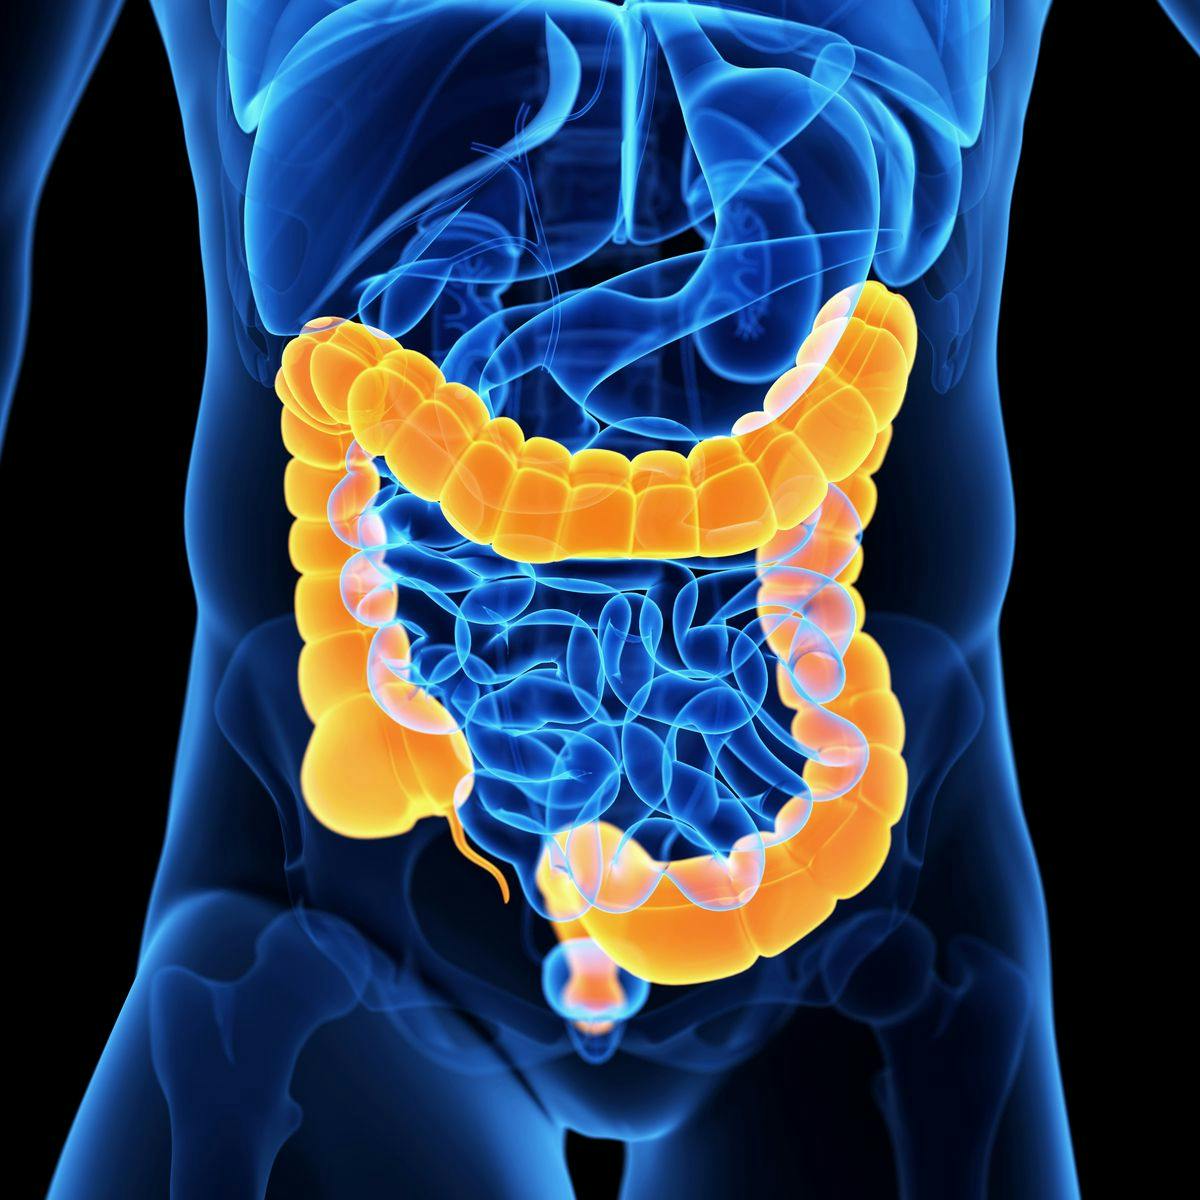 Artificial Intelligence May Help Differentiate Colon Carcinoma From Acute Diverticulitis